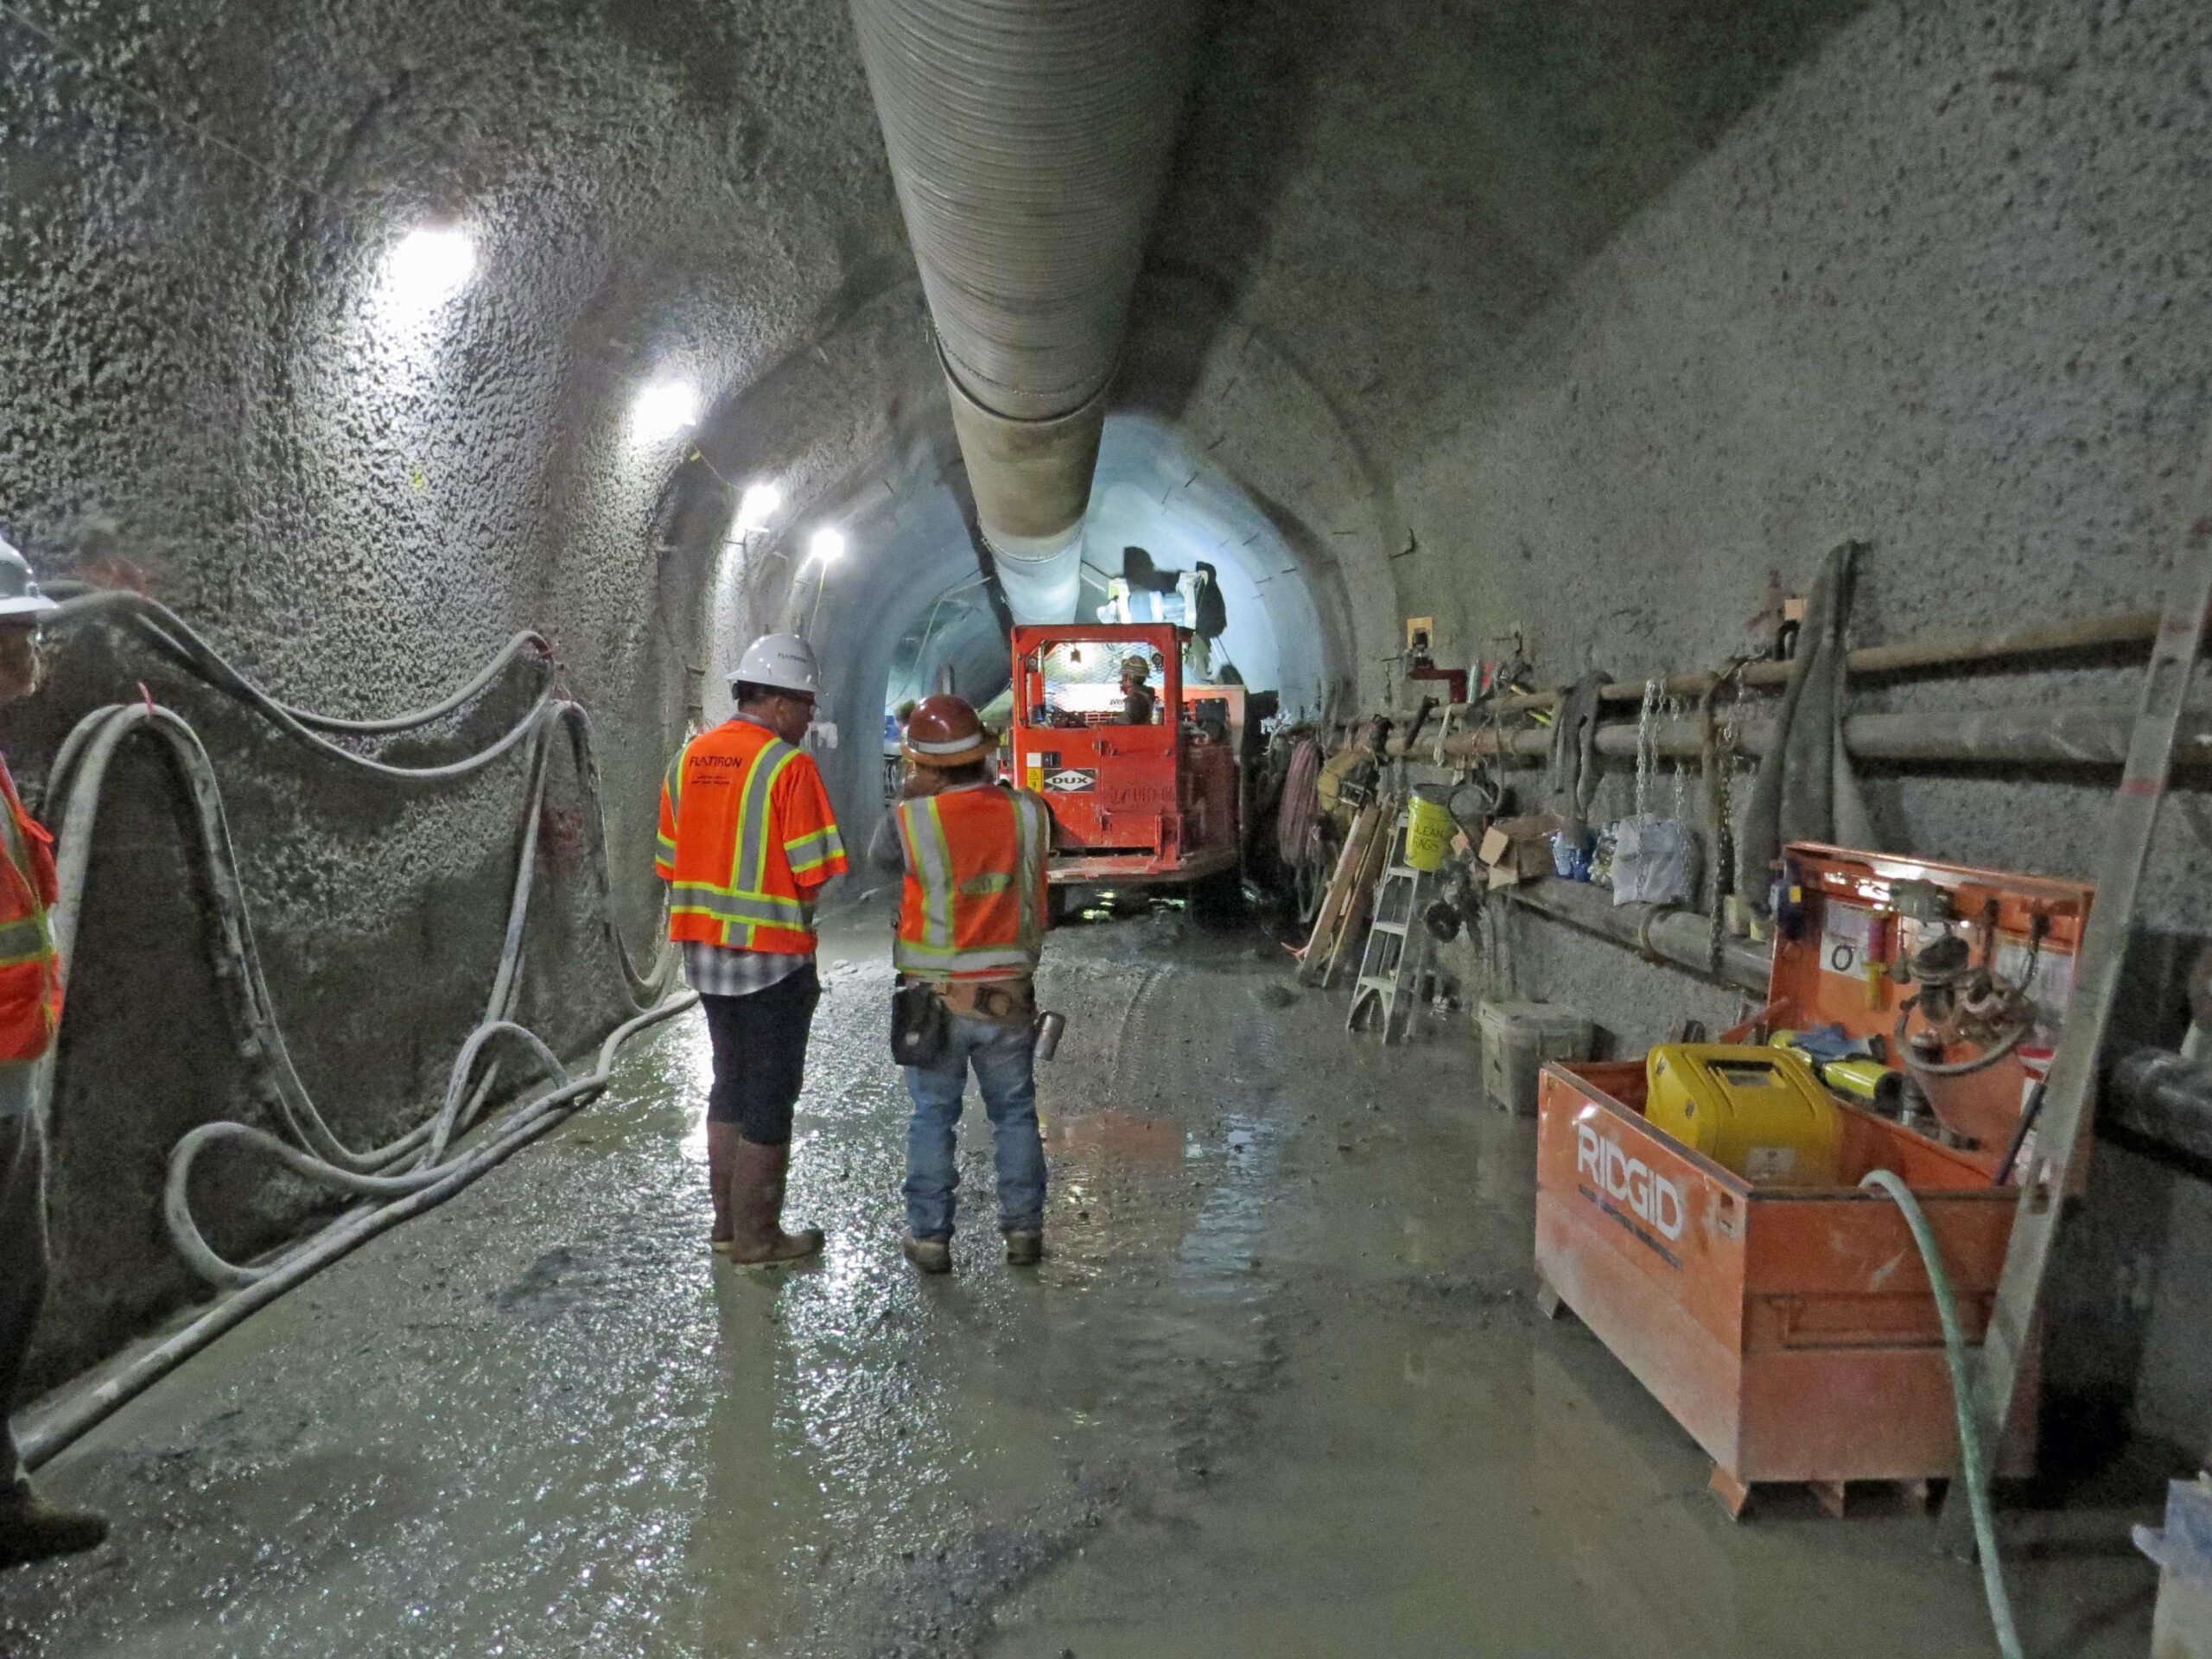 main-story-tunnel-being-built-under-downtown-morgan-hill-will-control